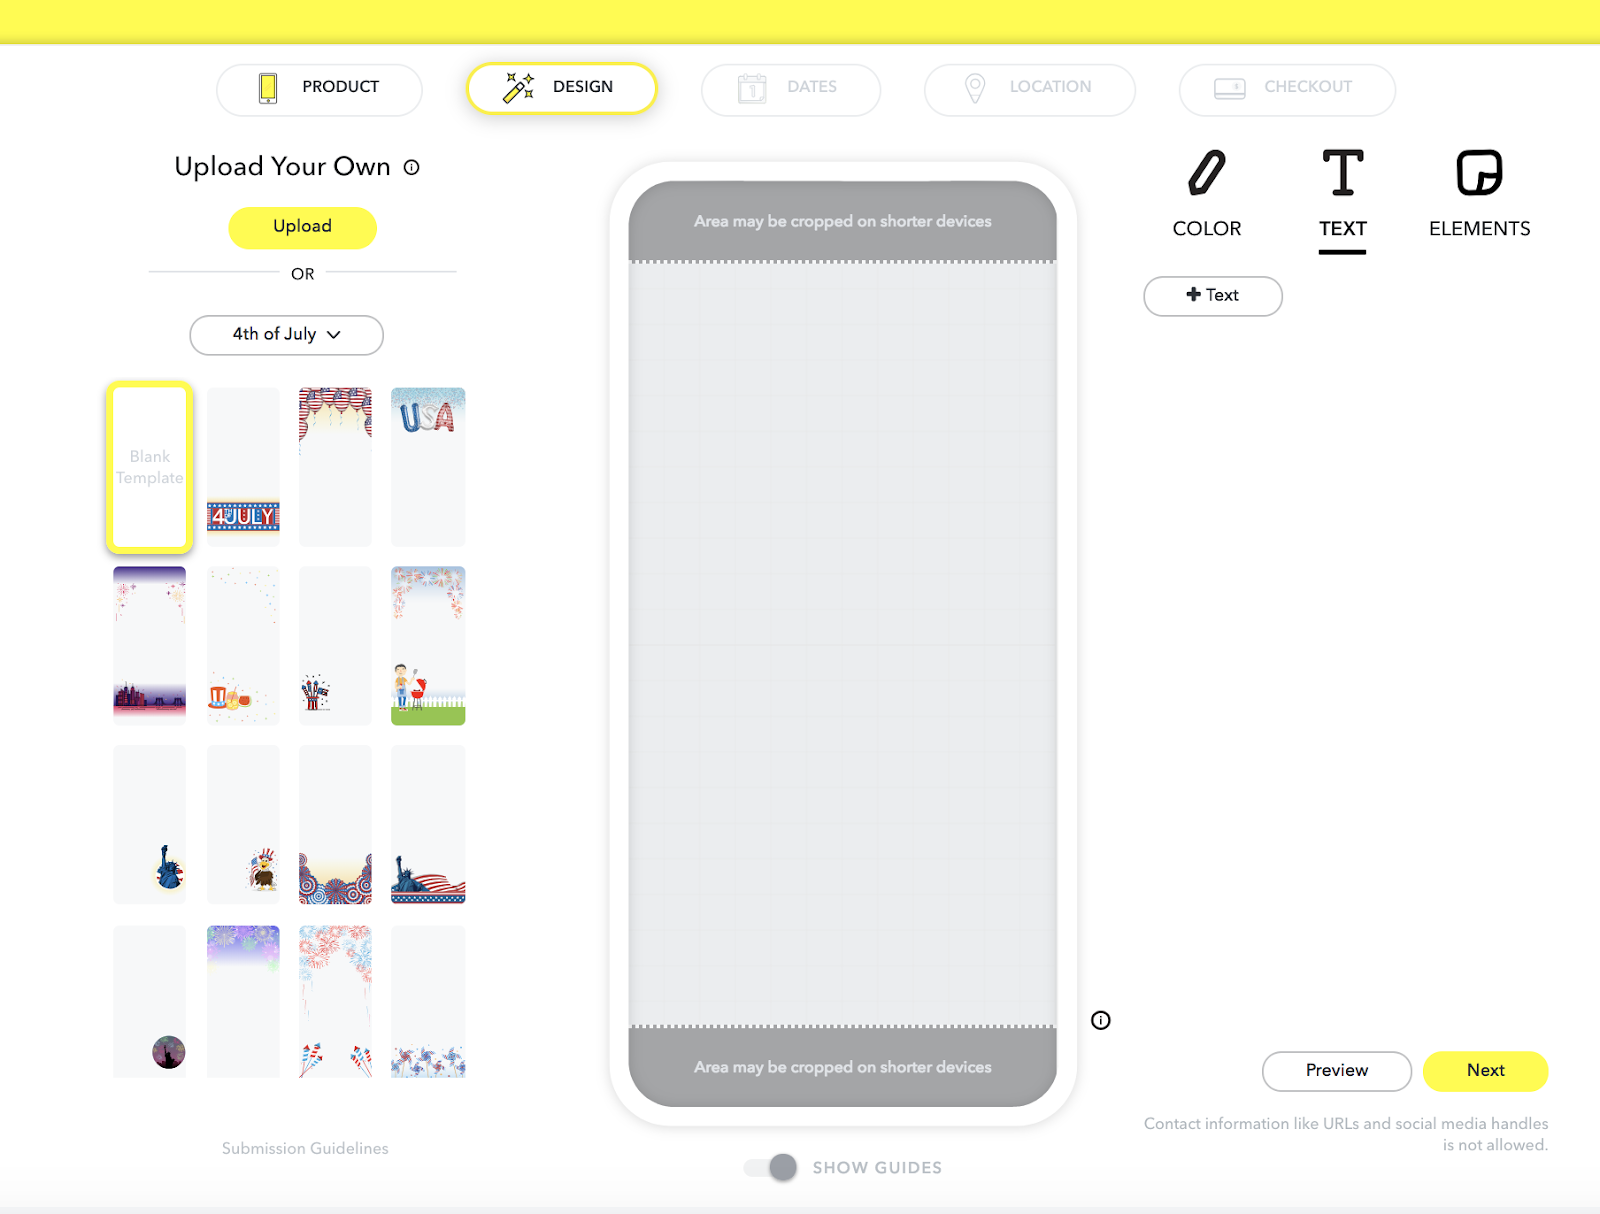 How to Use Snapchat Geofilters to Improve Your Marketing Strategy